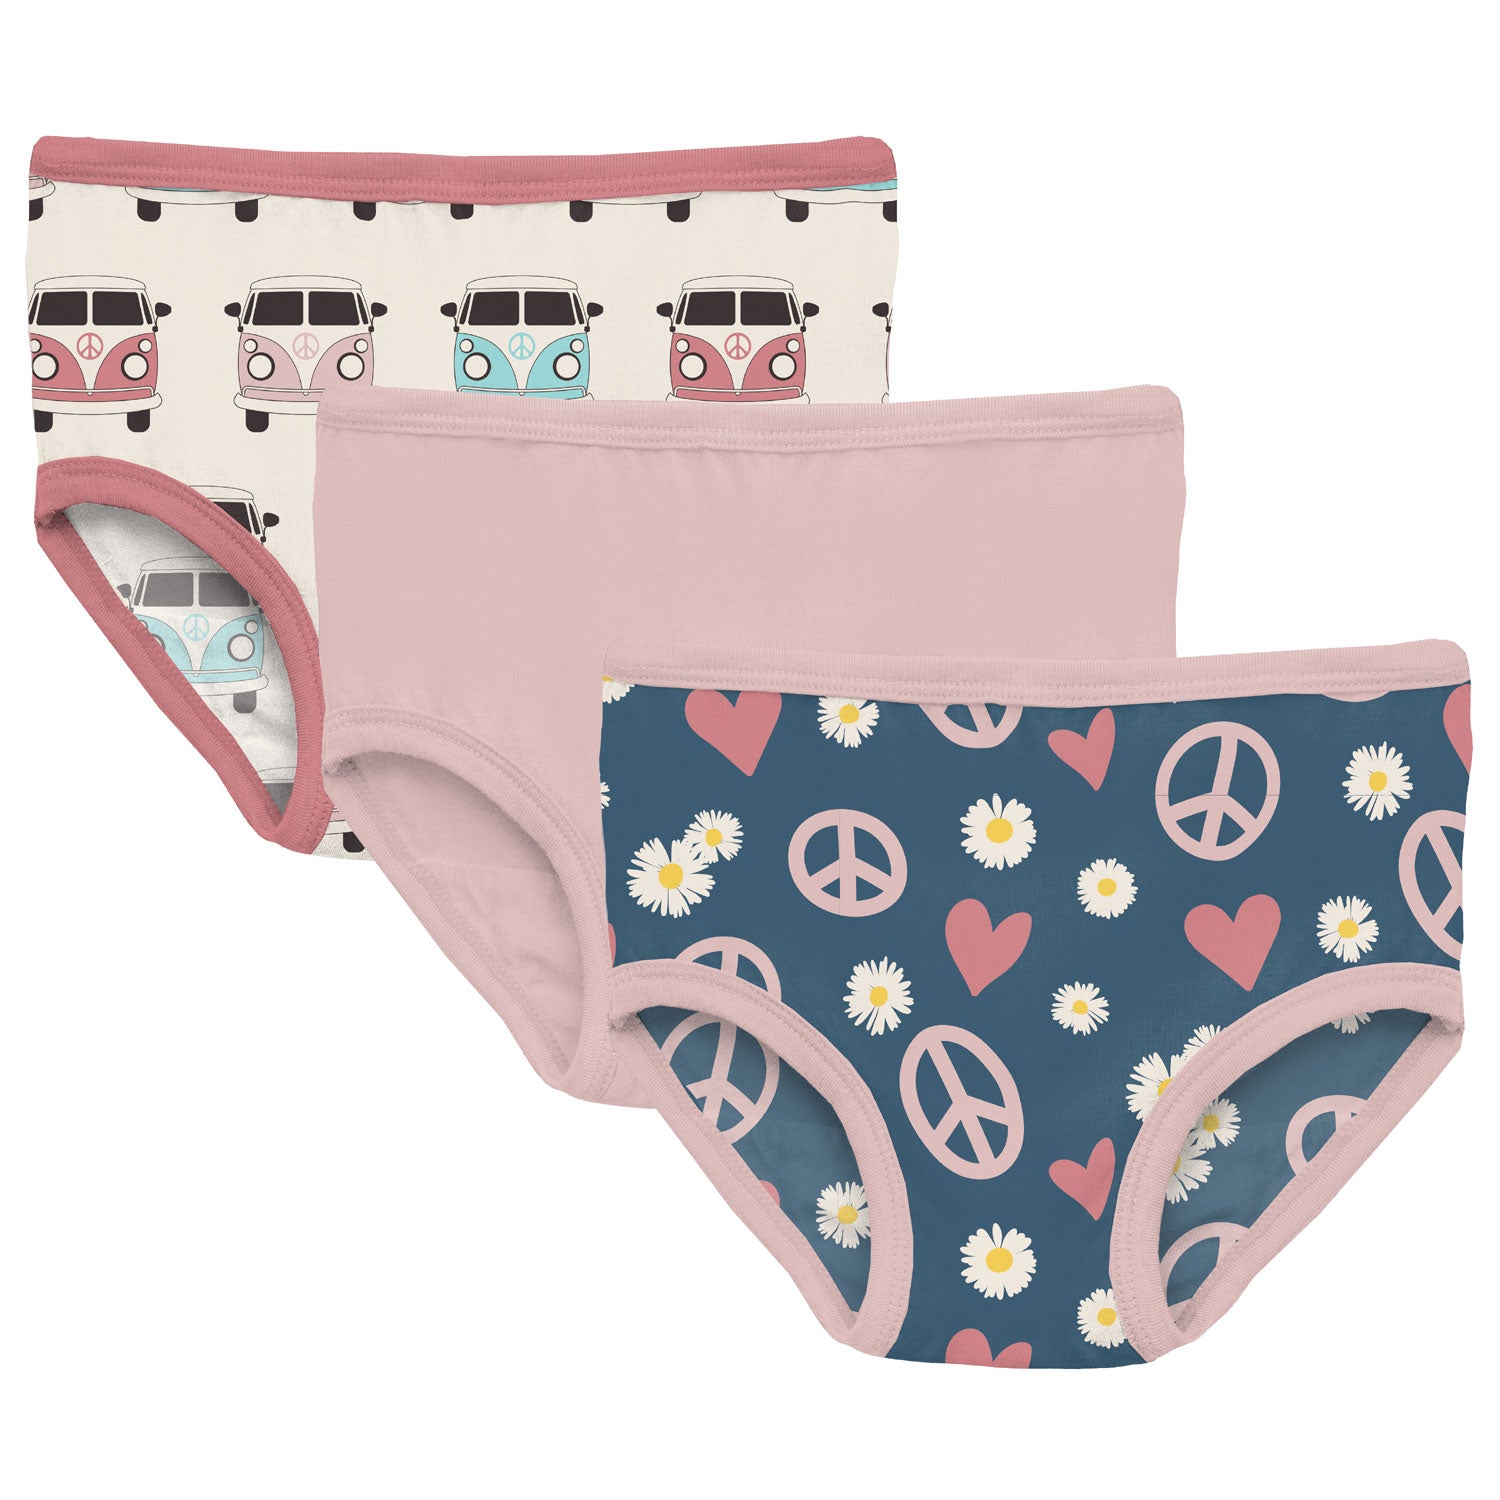 Kickee Pants Bamboo Girls Underwear Set - Peace, Love and Happiness